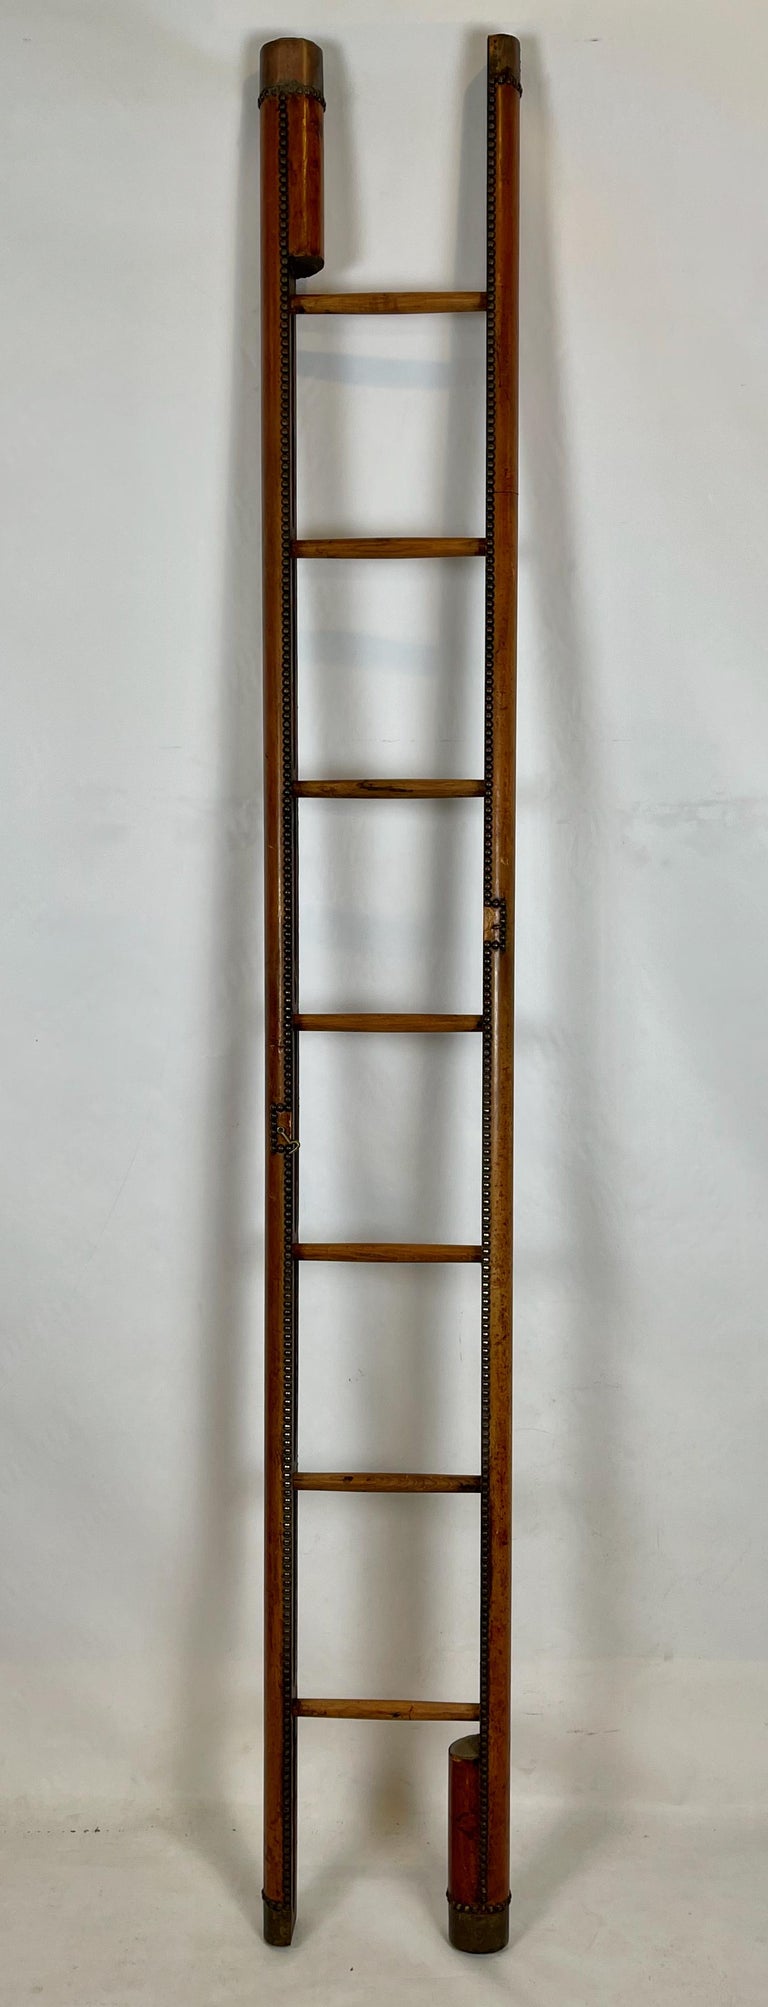 Early 20th Century English Leather Clad Folding Pole Ladder For Sale 2